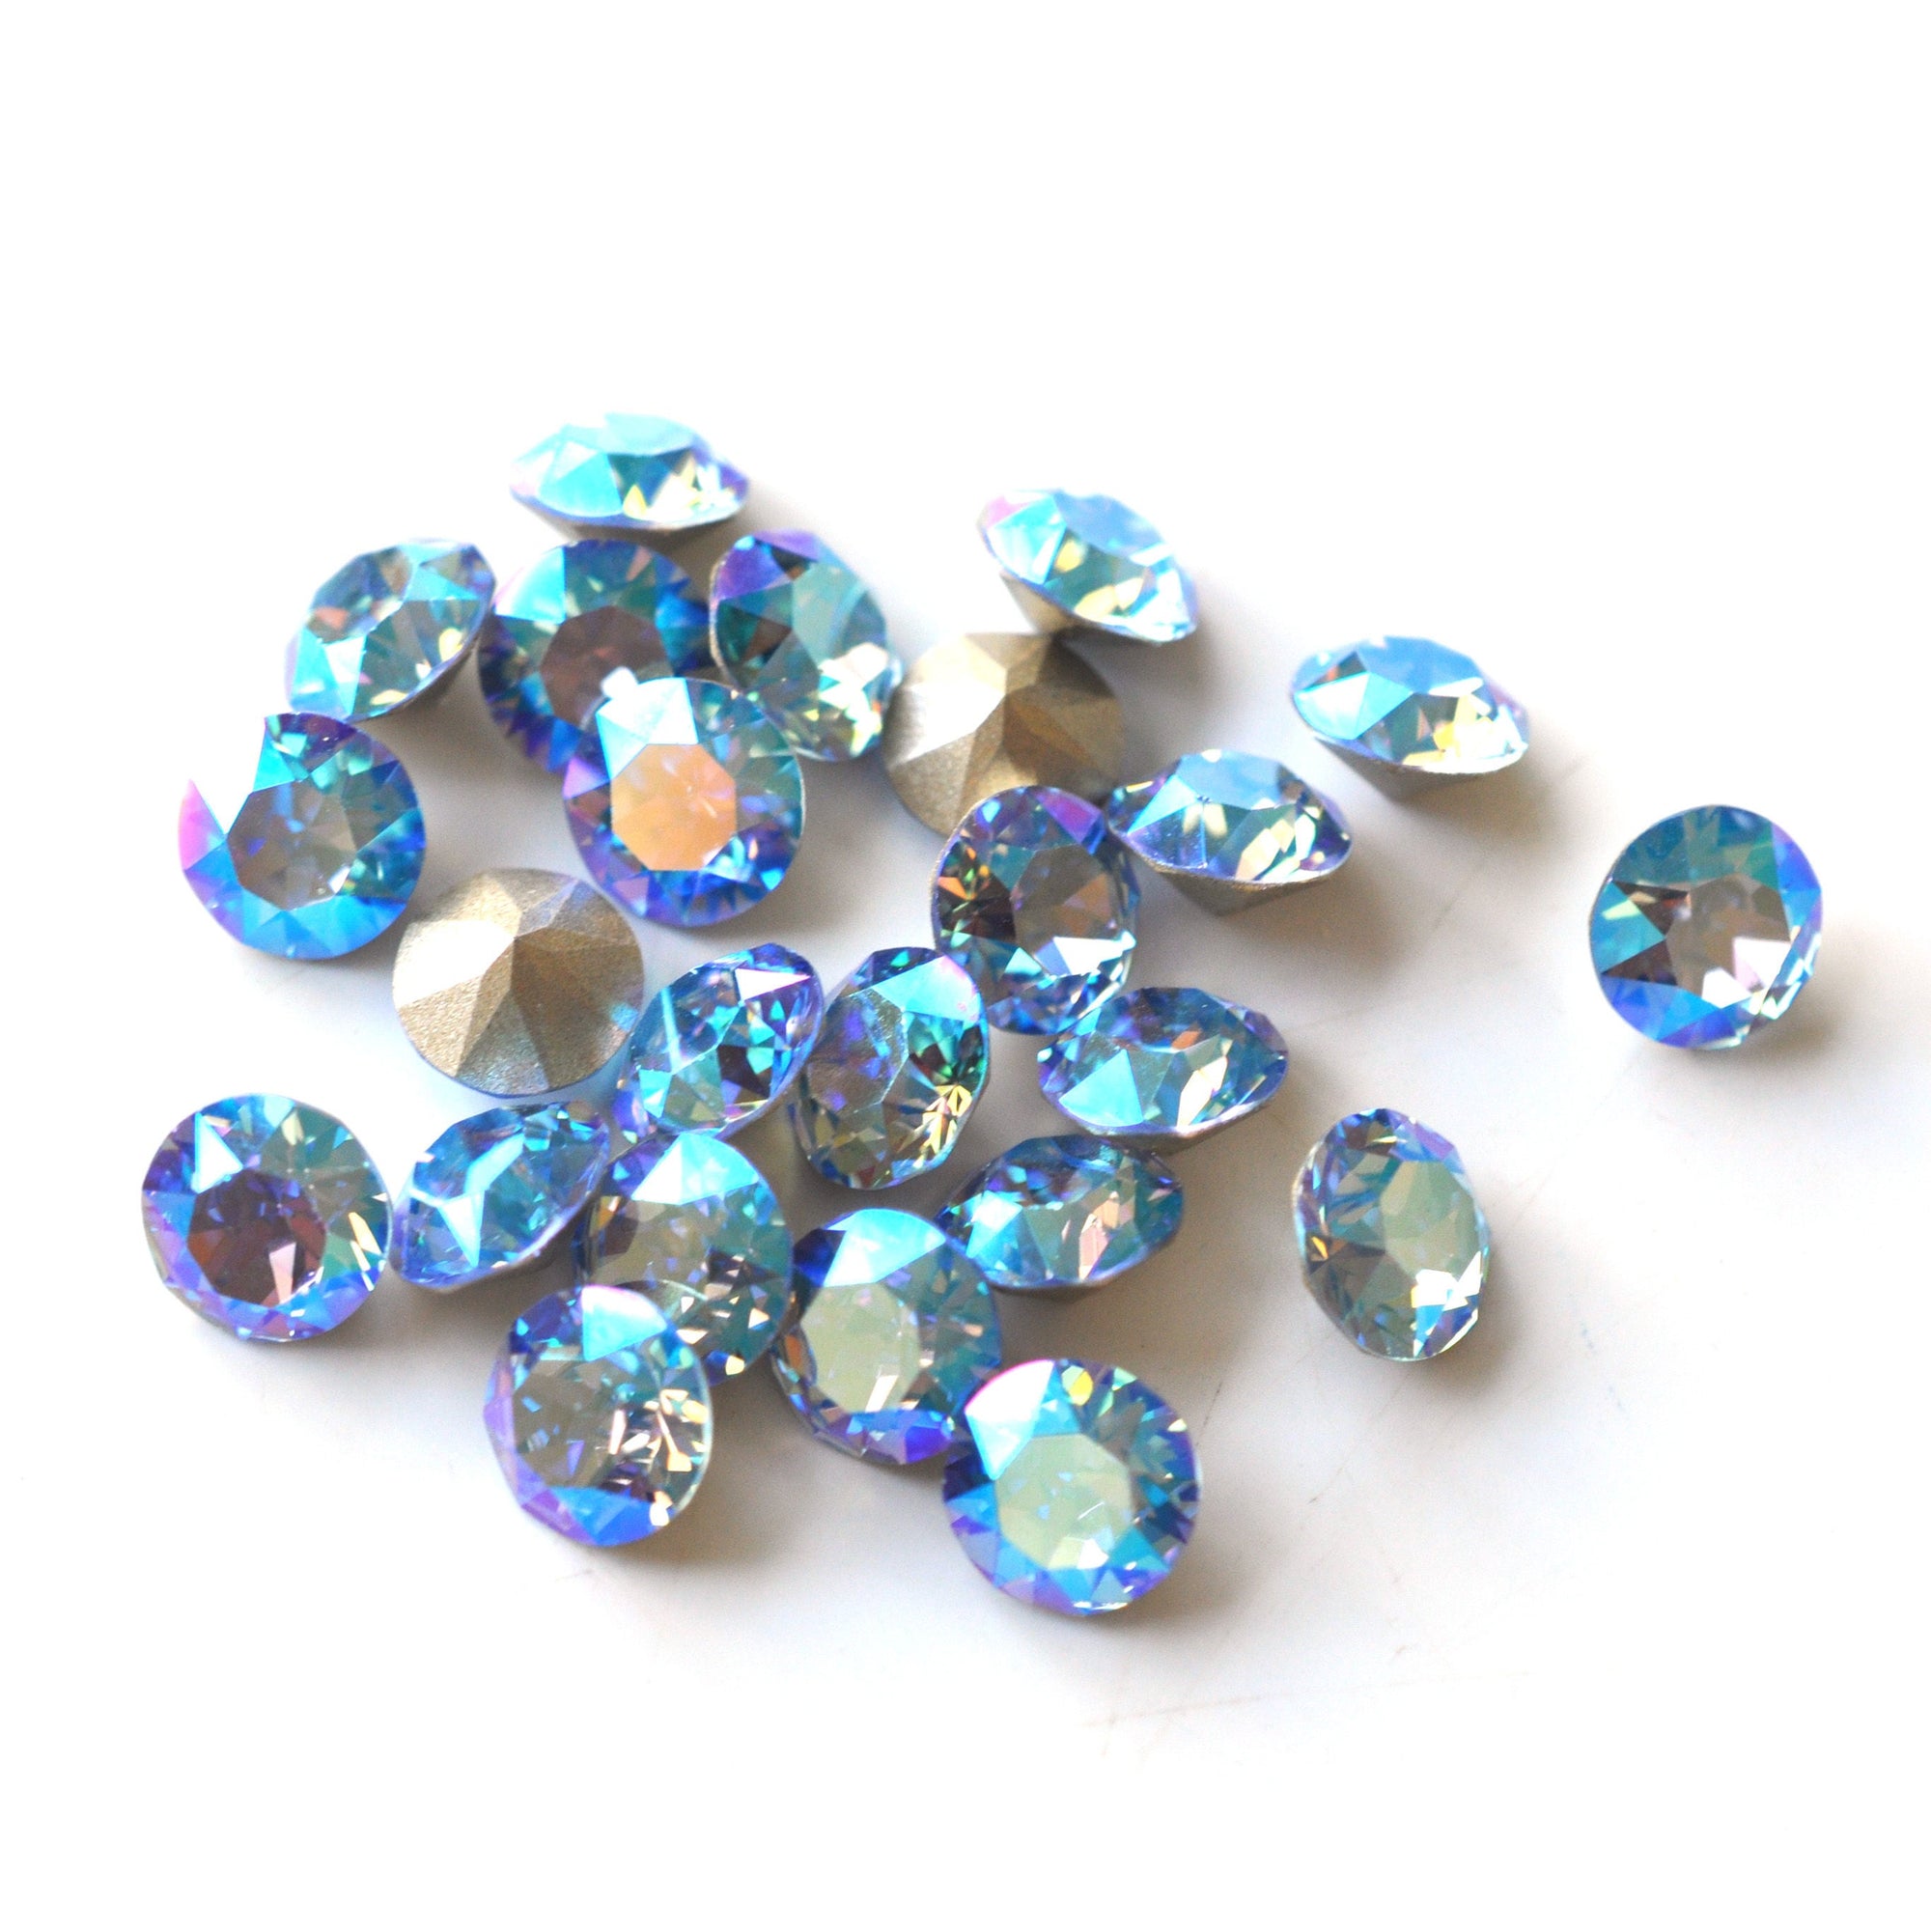 Light Sapphire Shimmer 1088 Pointed Back Chaton Barton Crystal 39ss, 8mm